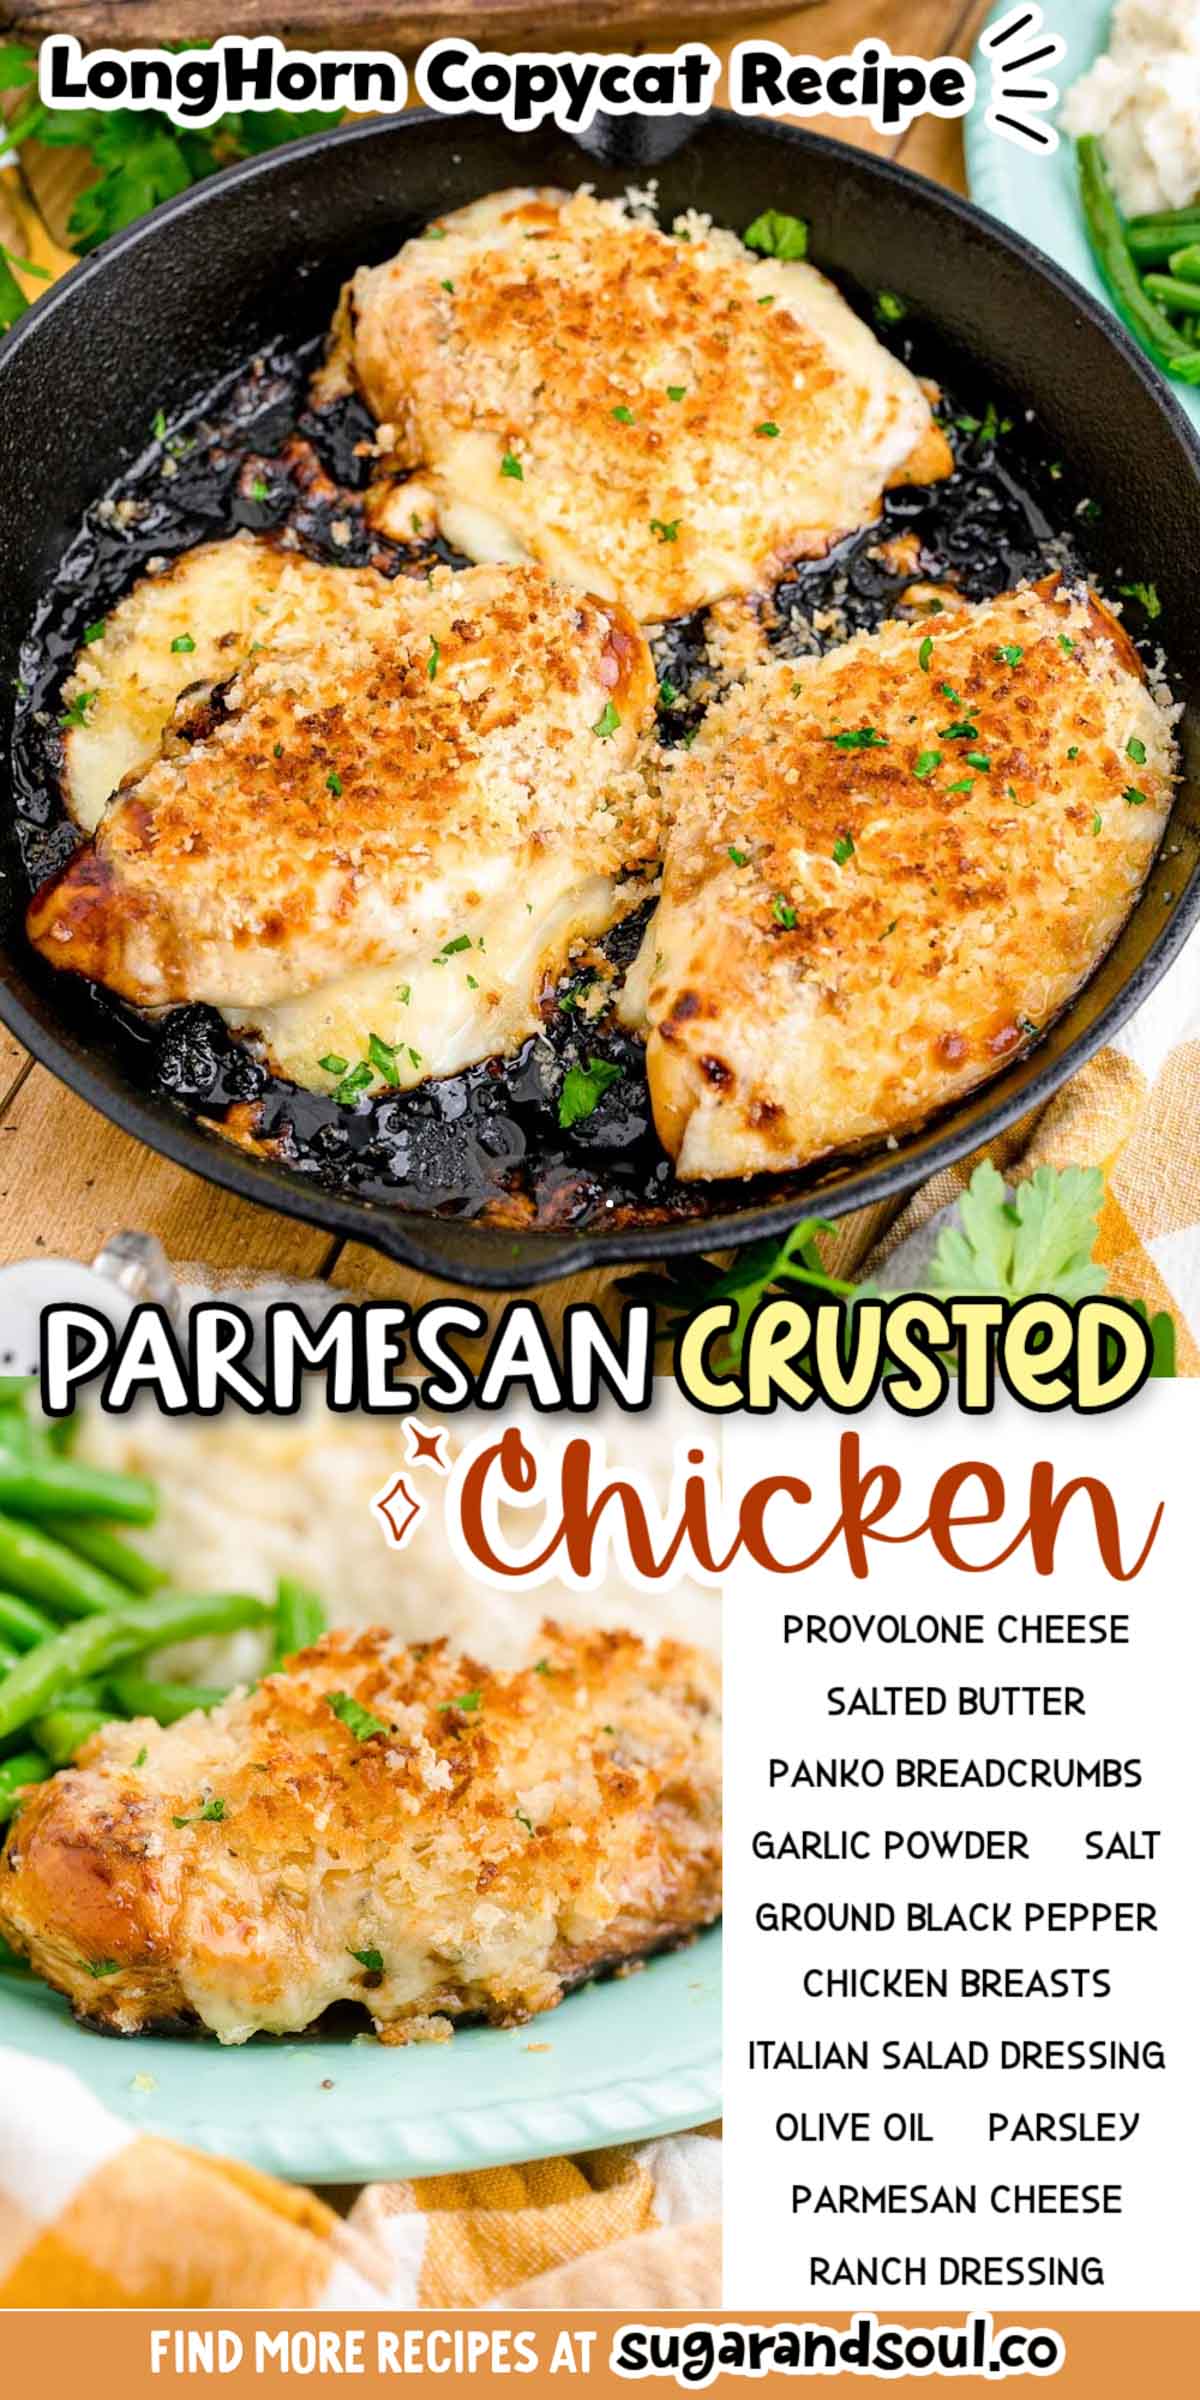 Parmesan Crusted Chicken (LongHorn Copycat) - Sugar and Soul